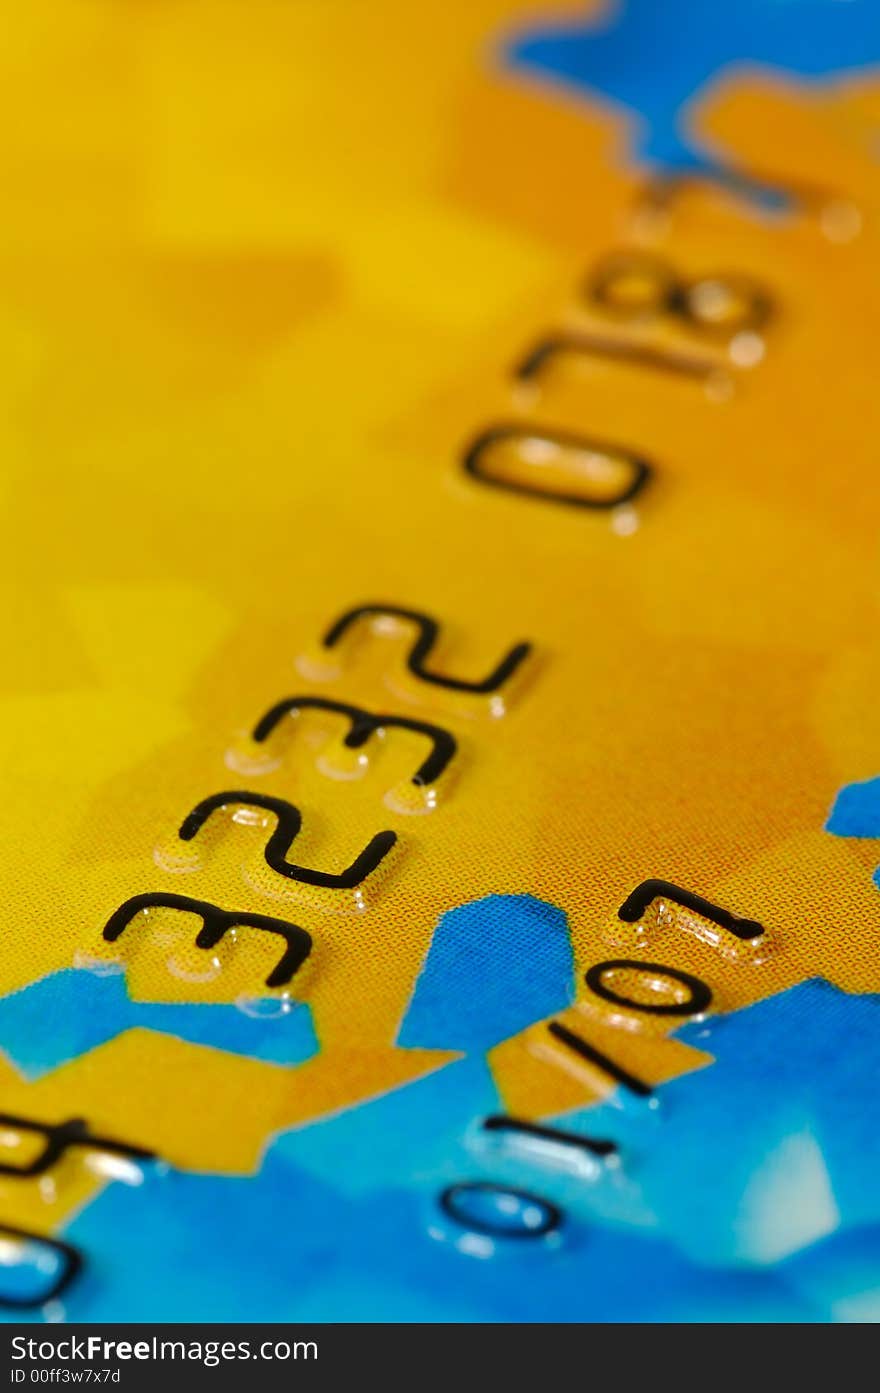 Close-up of digits on a credit card. Very shallow depth of field. Focus on numbers 3, 2 and 7. Visible texture of the card.